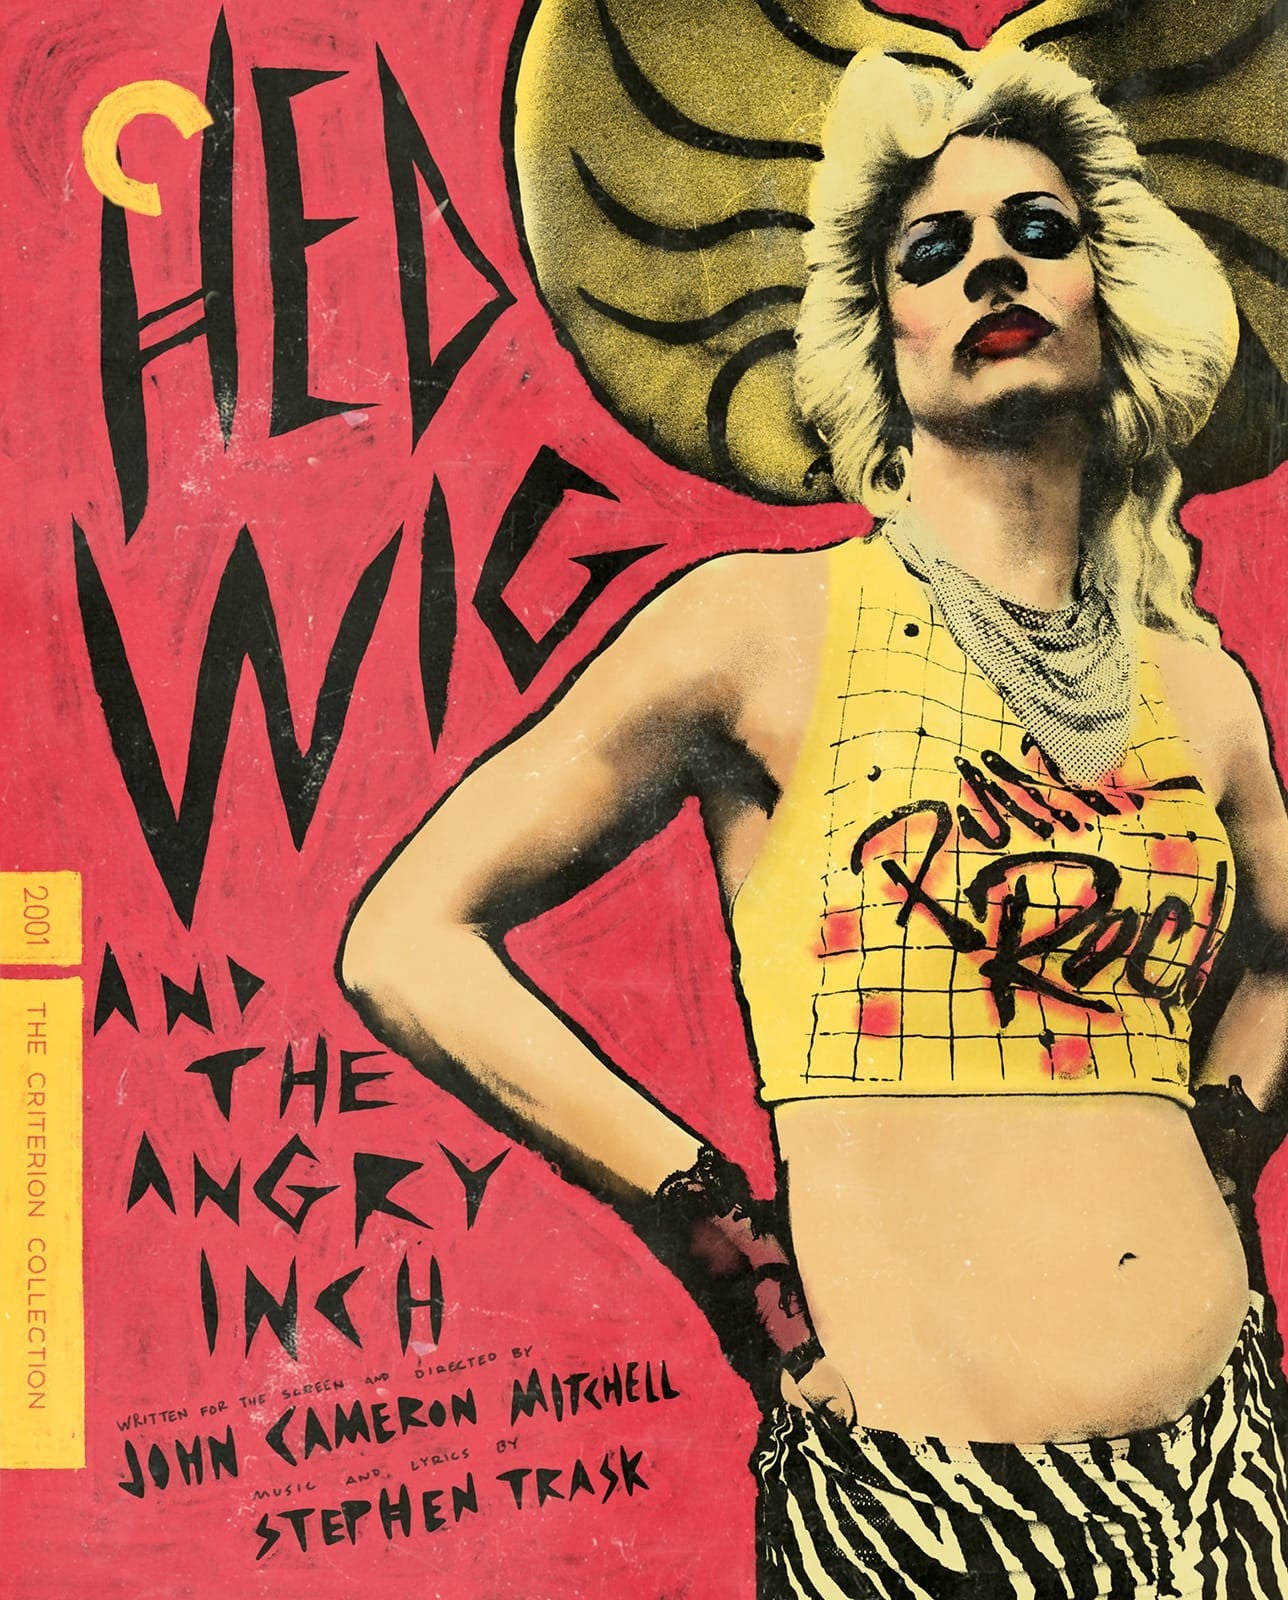 Mitchell, John Cameron - Hedwig and the Angry Inch - Blu-Ray